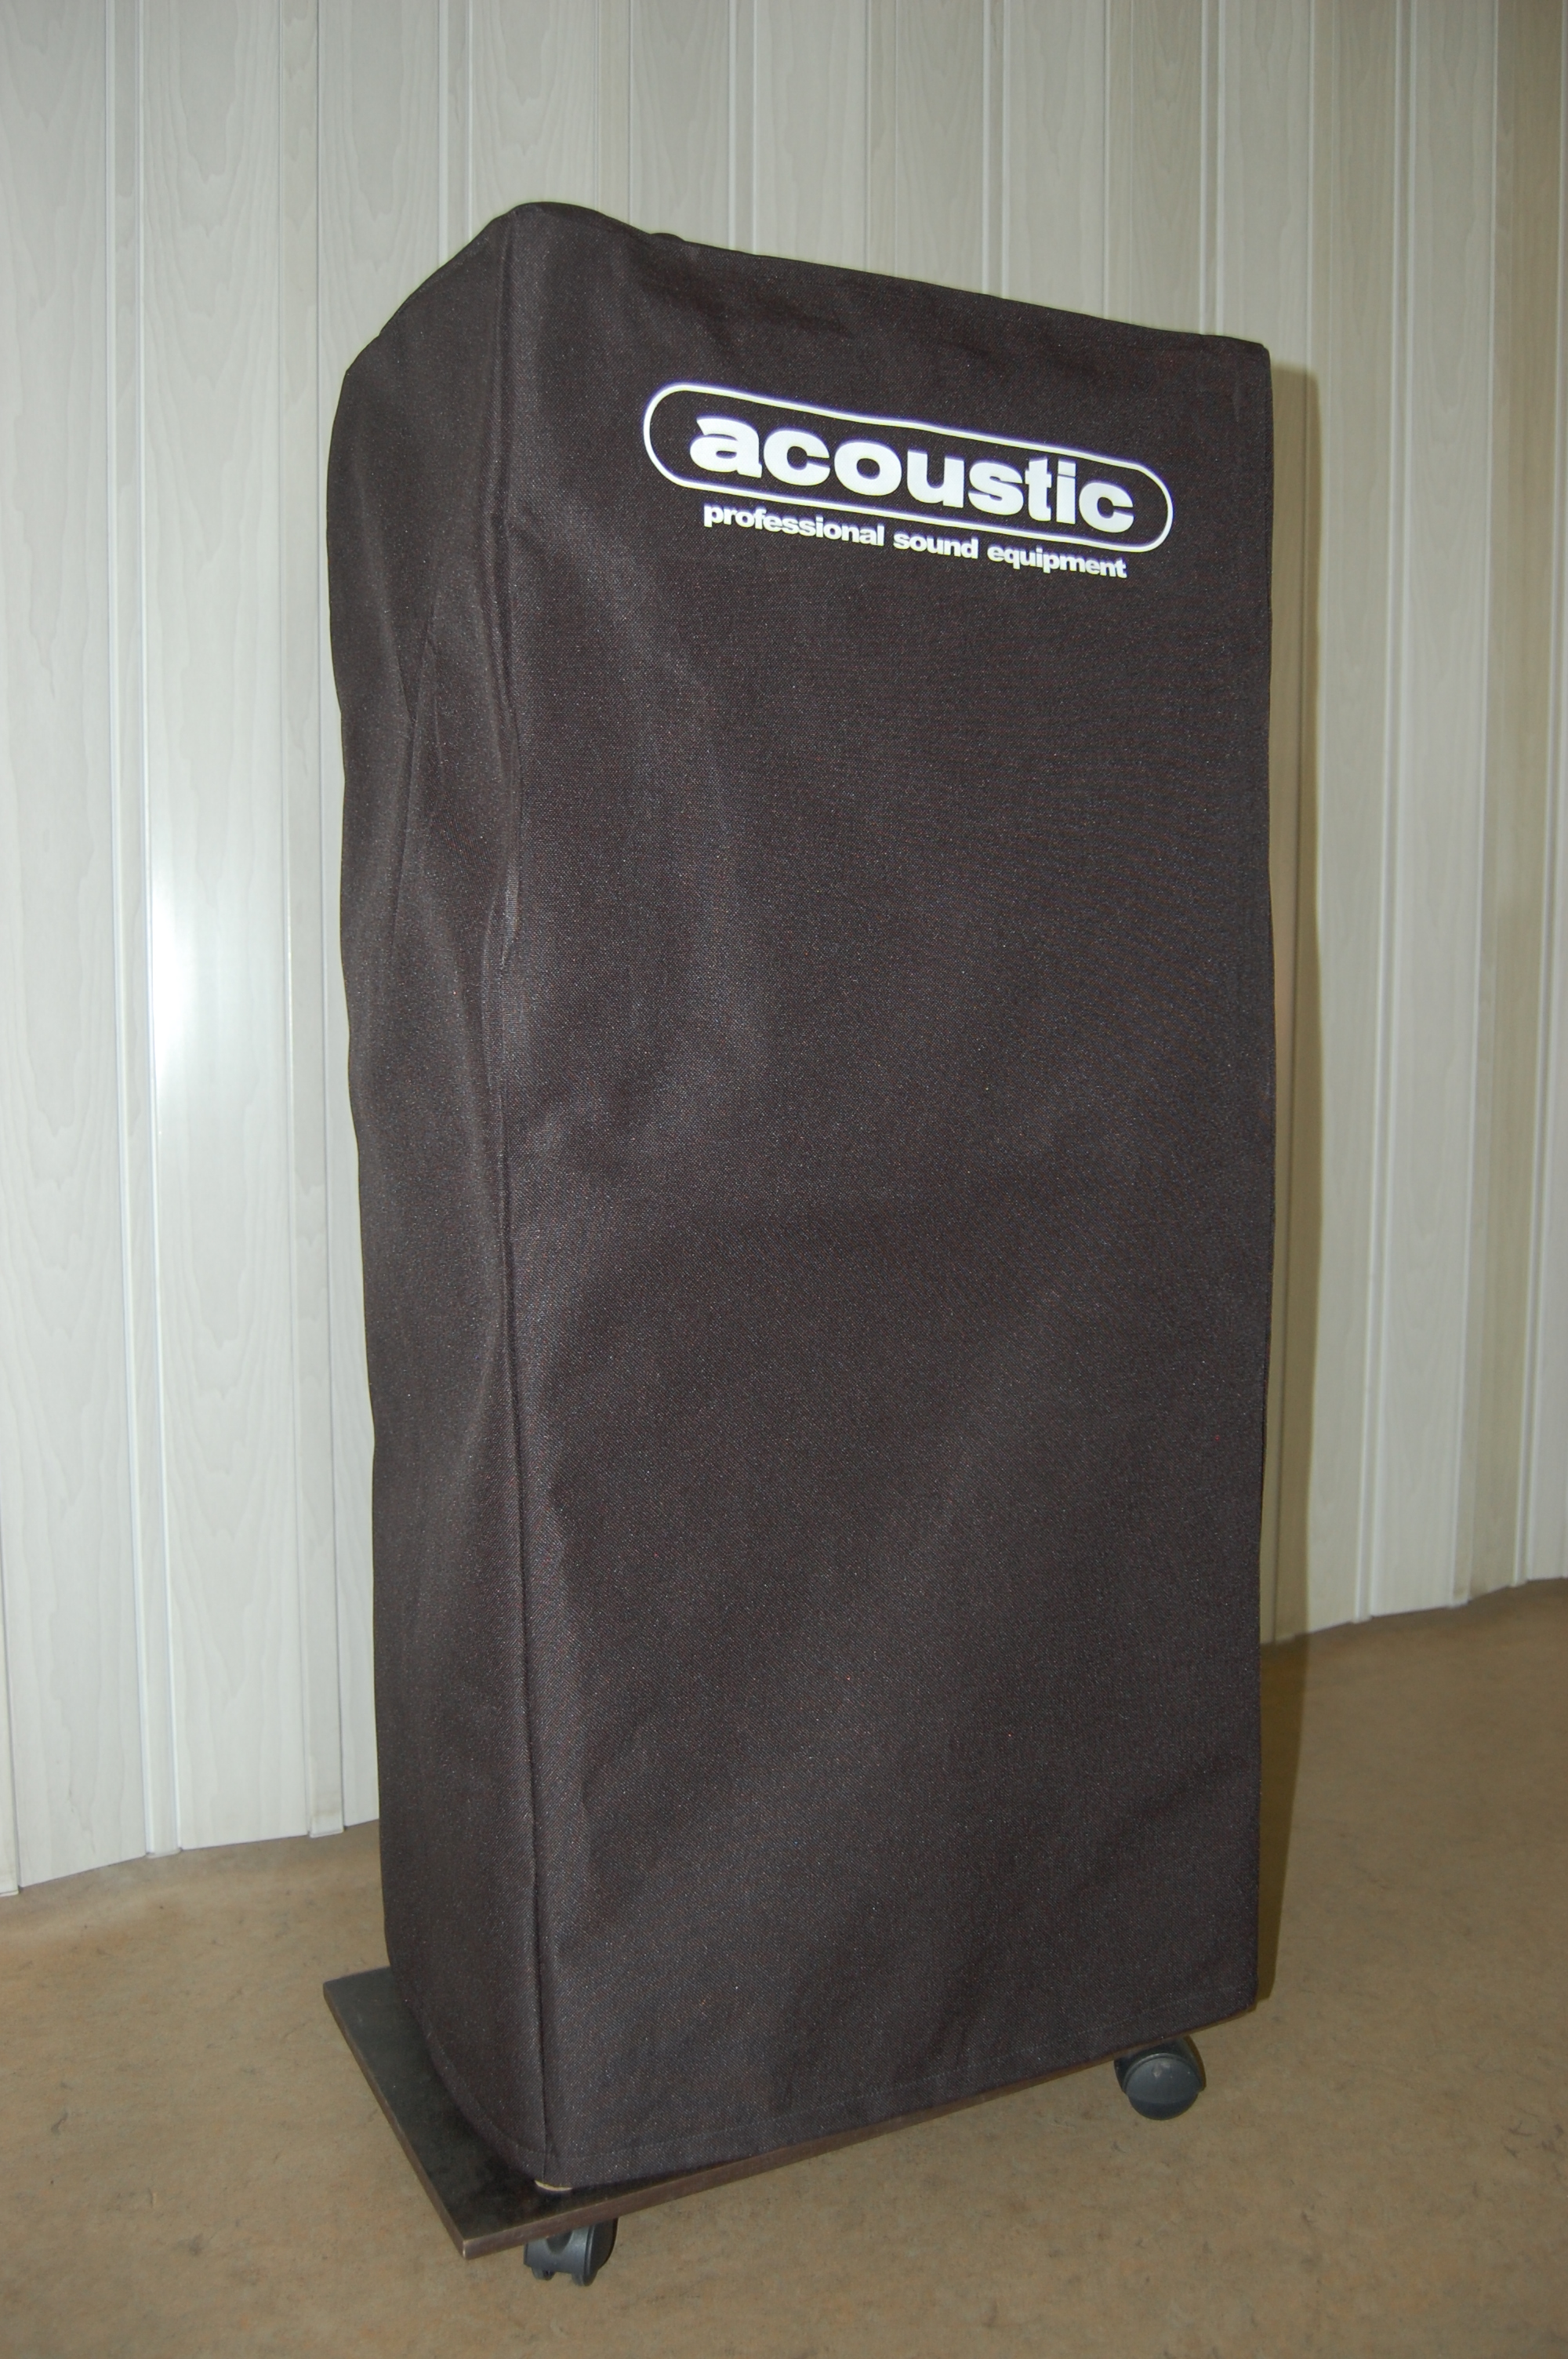 2xAcoustic G60-112sometime is good to have a cover on it.JPG